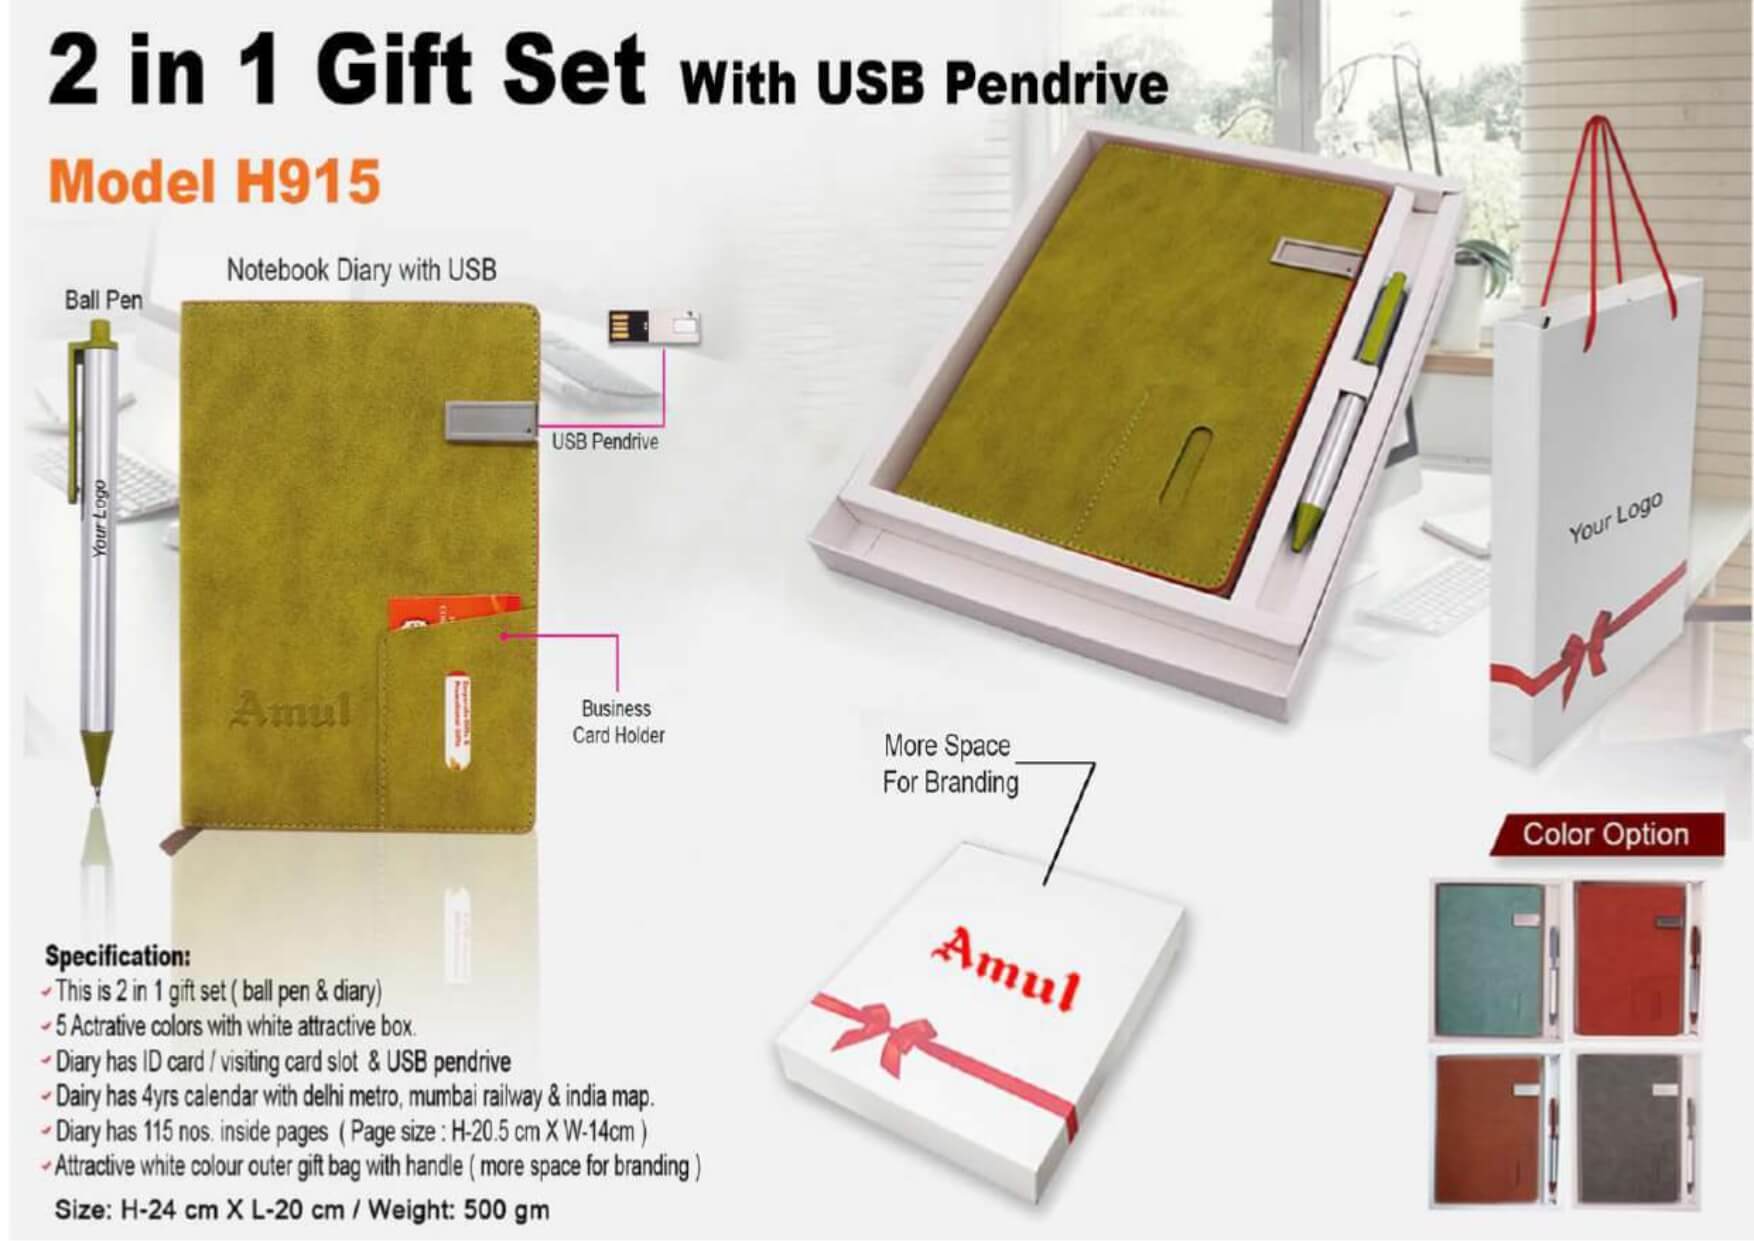 2 in 1 Gift Set Diary and Pen 915